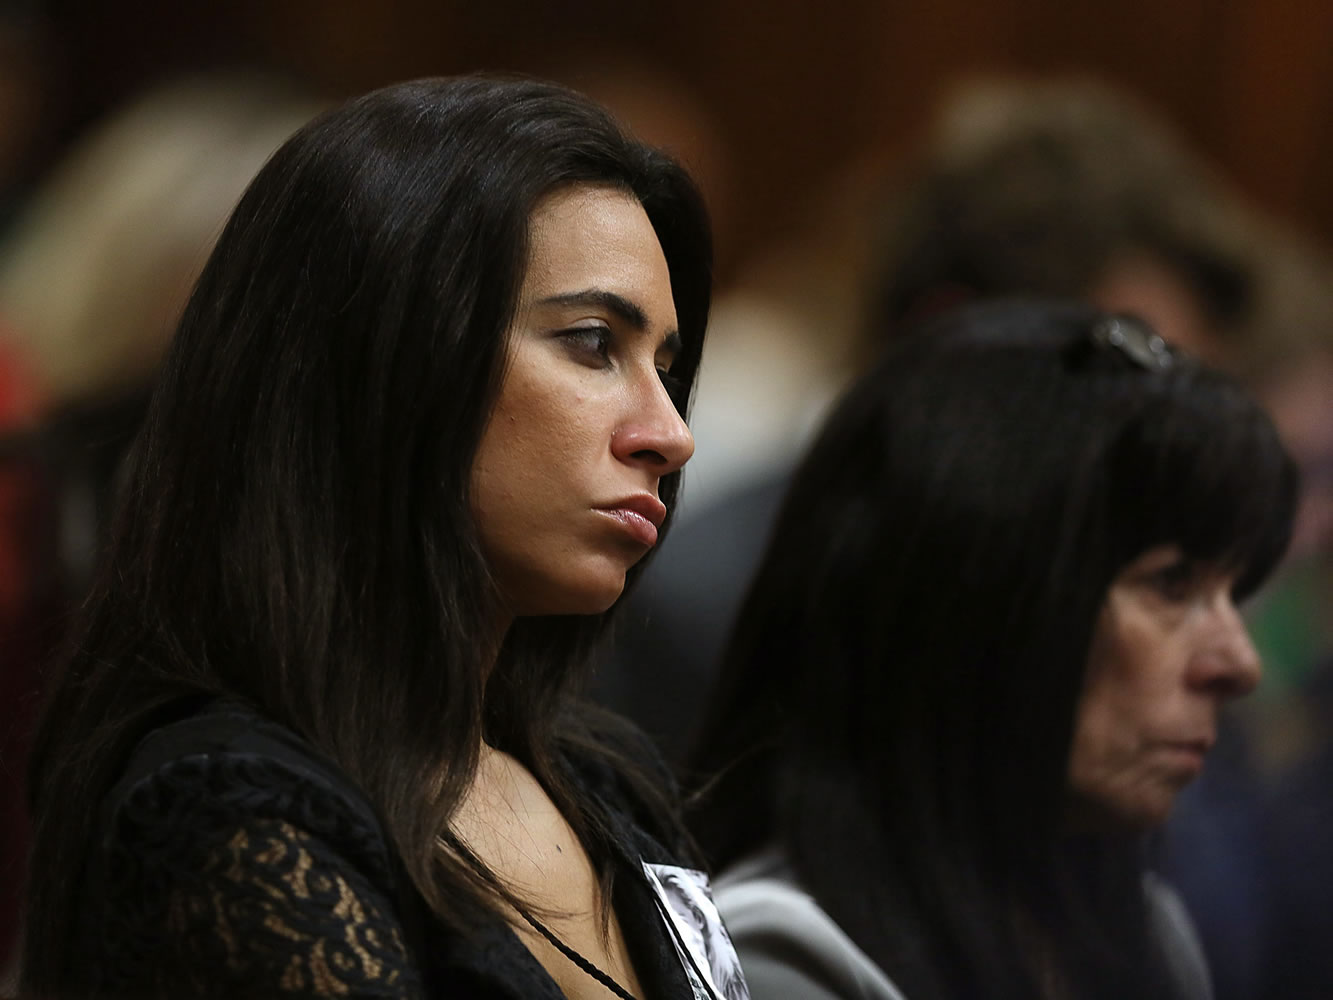 Friend of the late Reeva Steenkamp, Kim Myers, listens to a witness giving evidence during the murder trial of Oscar Pistorius in Pretoria, South Africa, on Tuesday.